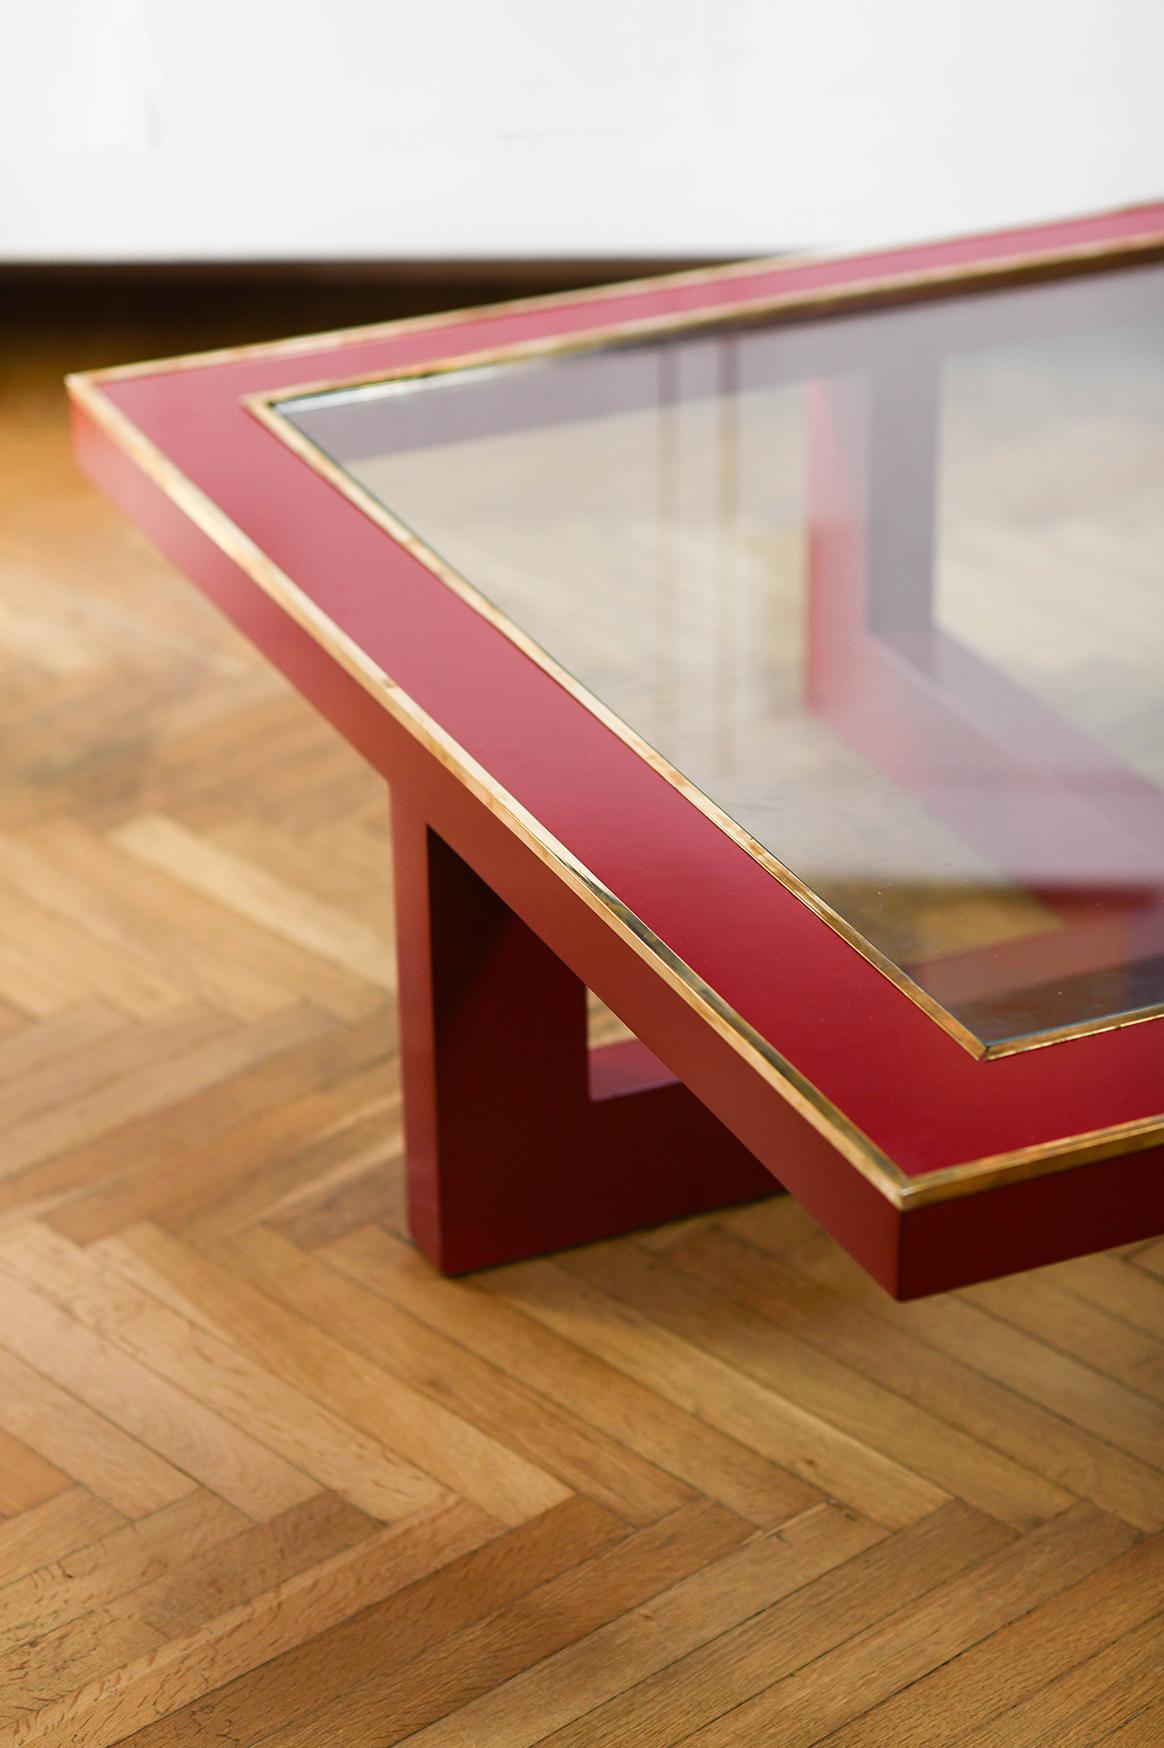 Large China red lacquered coffee table with brass details.
Product details
Dimensions: 120 W x 37 H x 120 D cm
Italian production from the 70s.